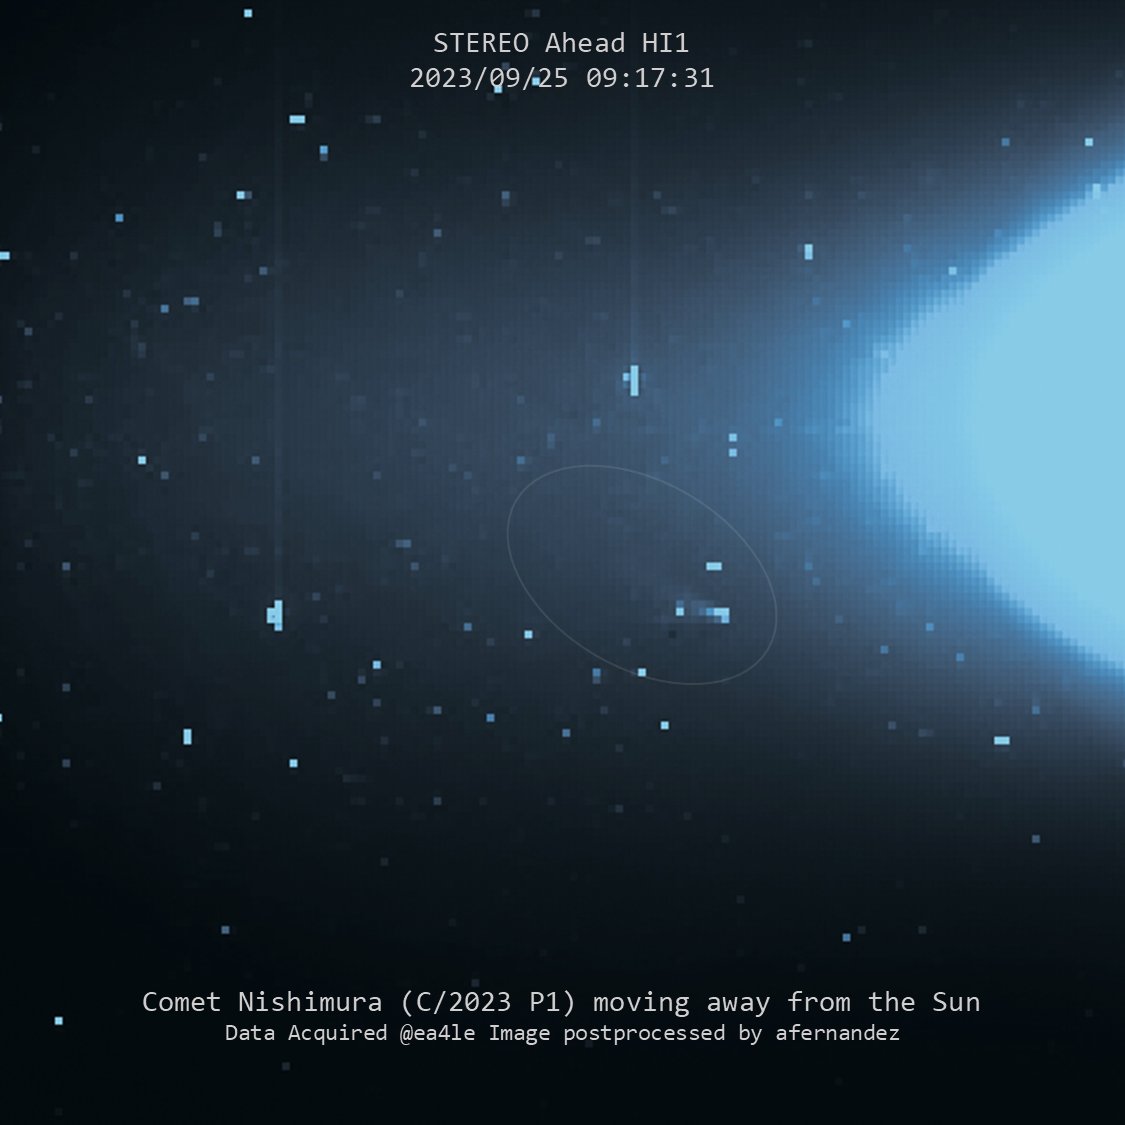 Comet Nishimura (C/2023 P1) moves away from the Sun 8 days after perihelion and is becoming fainter. It will take 435 years to reach again this area ;) Data from STEREO HI1 heliograph taken earlier today and received at EA4LE.